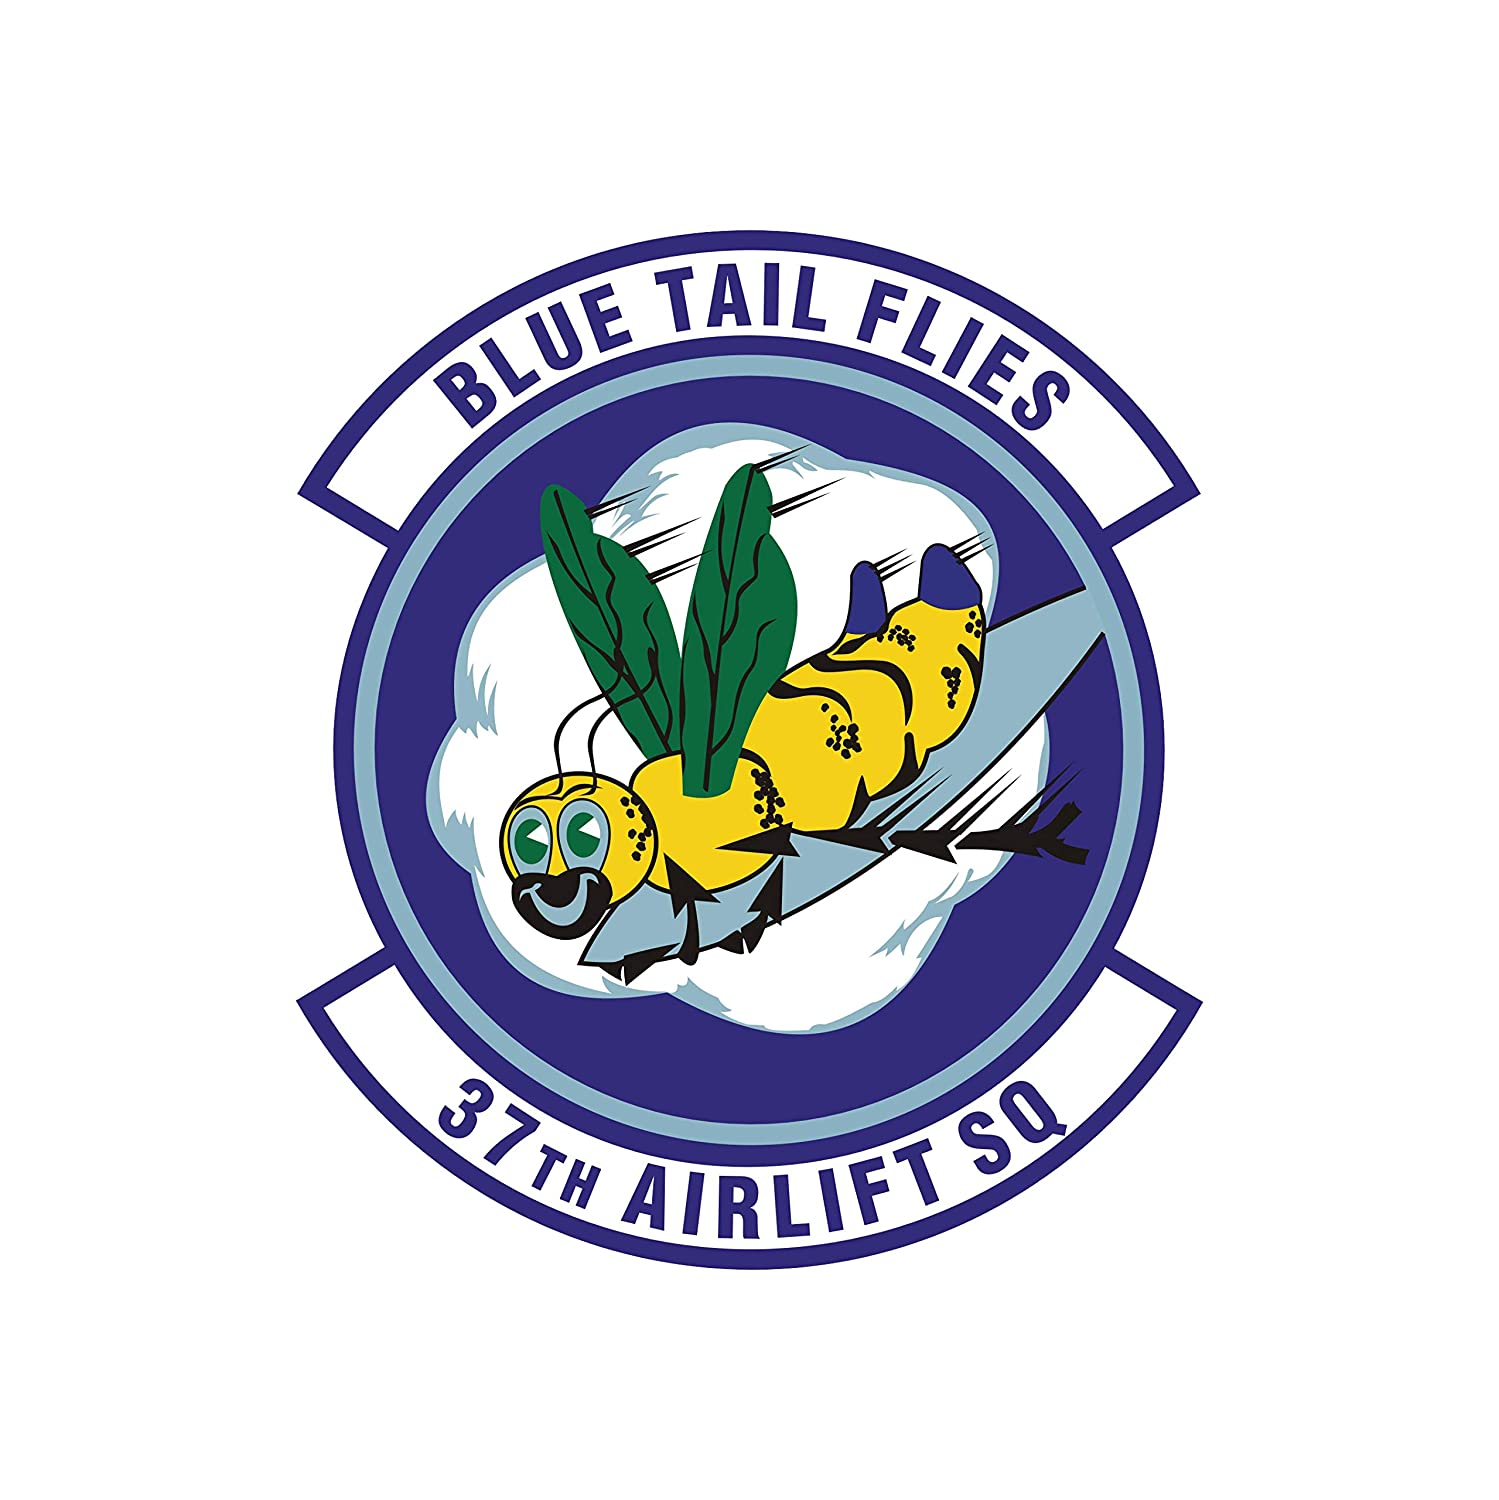 Blue Tail Flies 37th Airlift Squadron - Patch Vinyl Decal - Available in Multiple Sizes